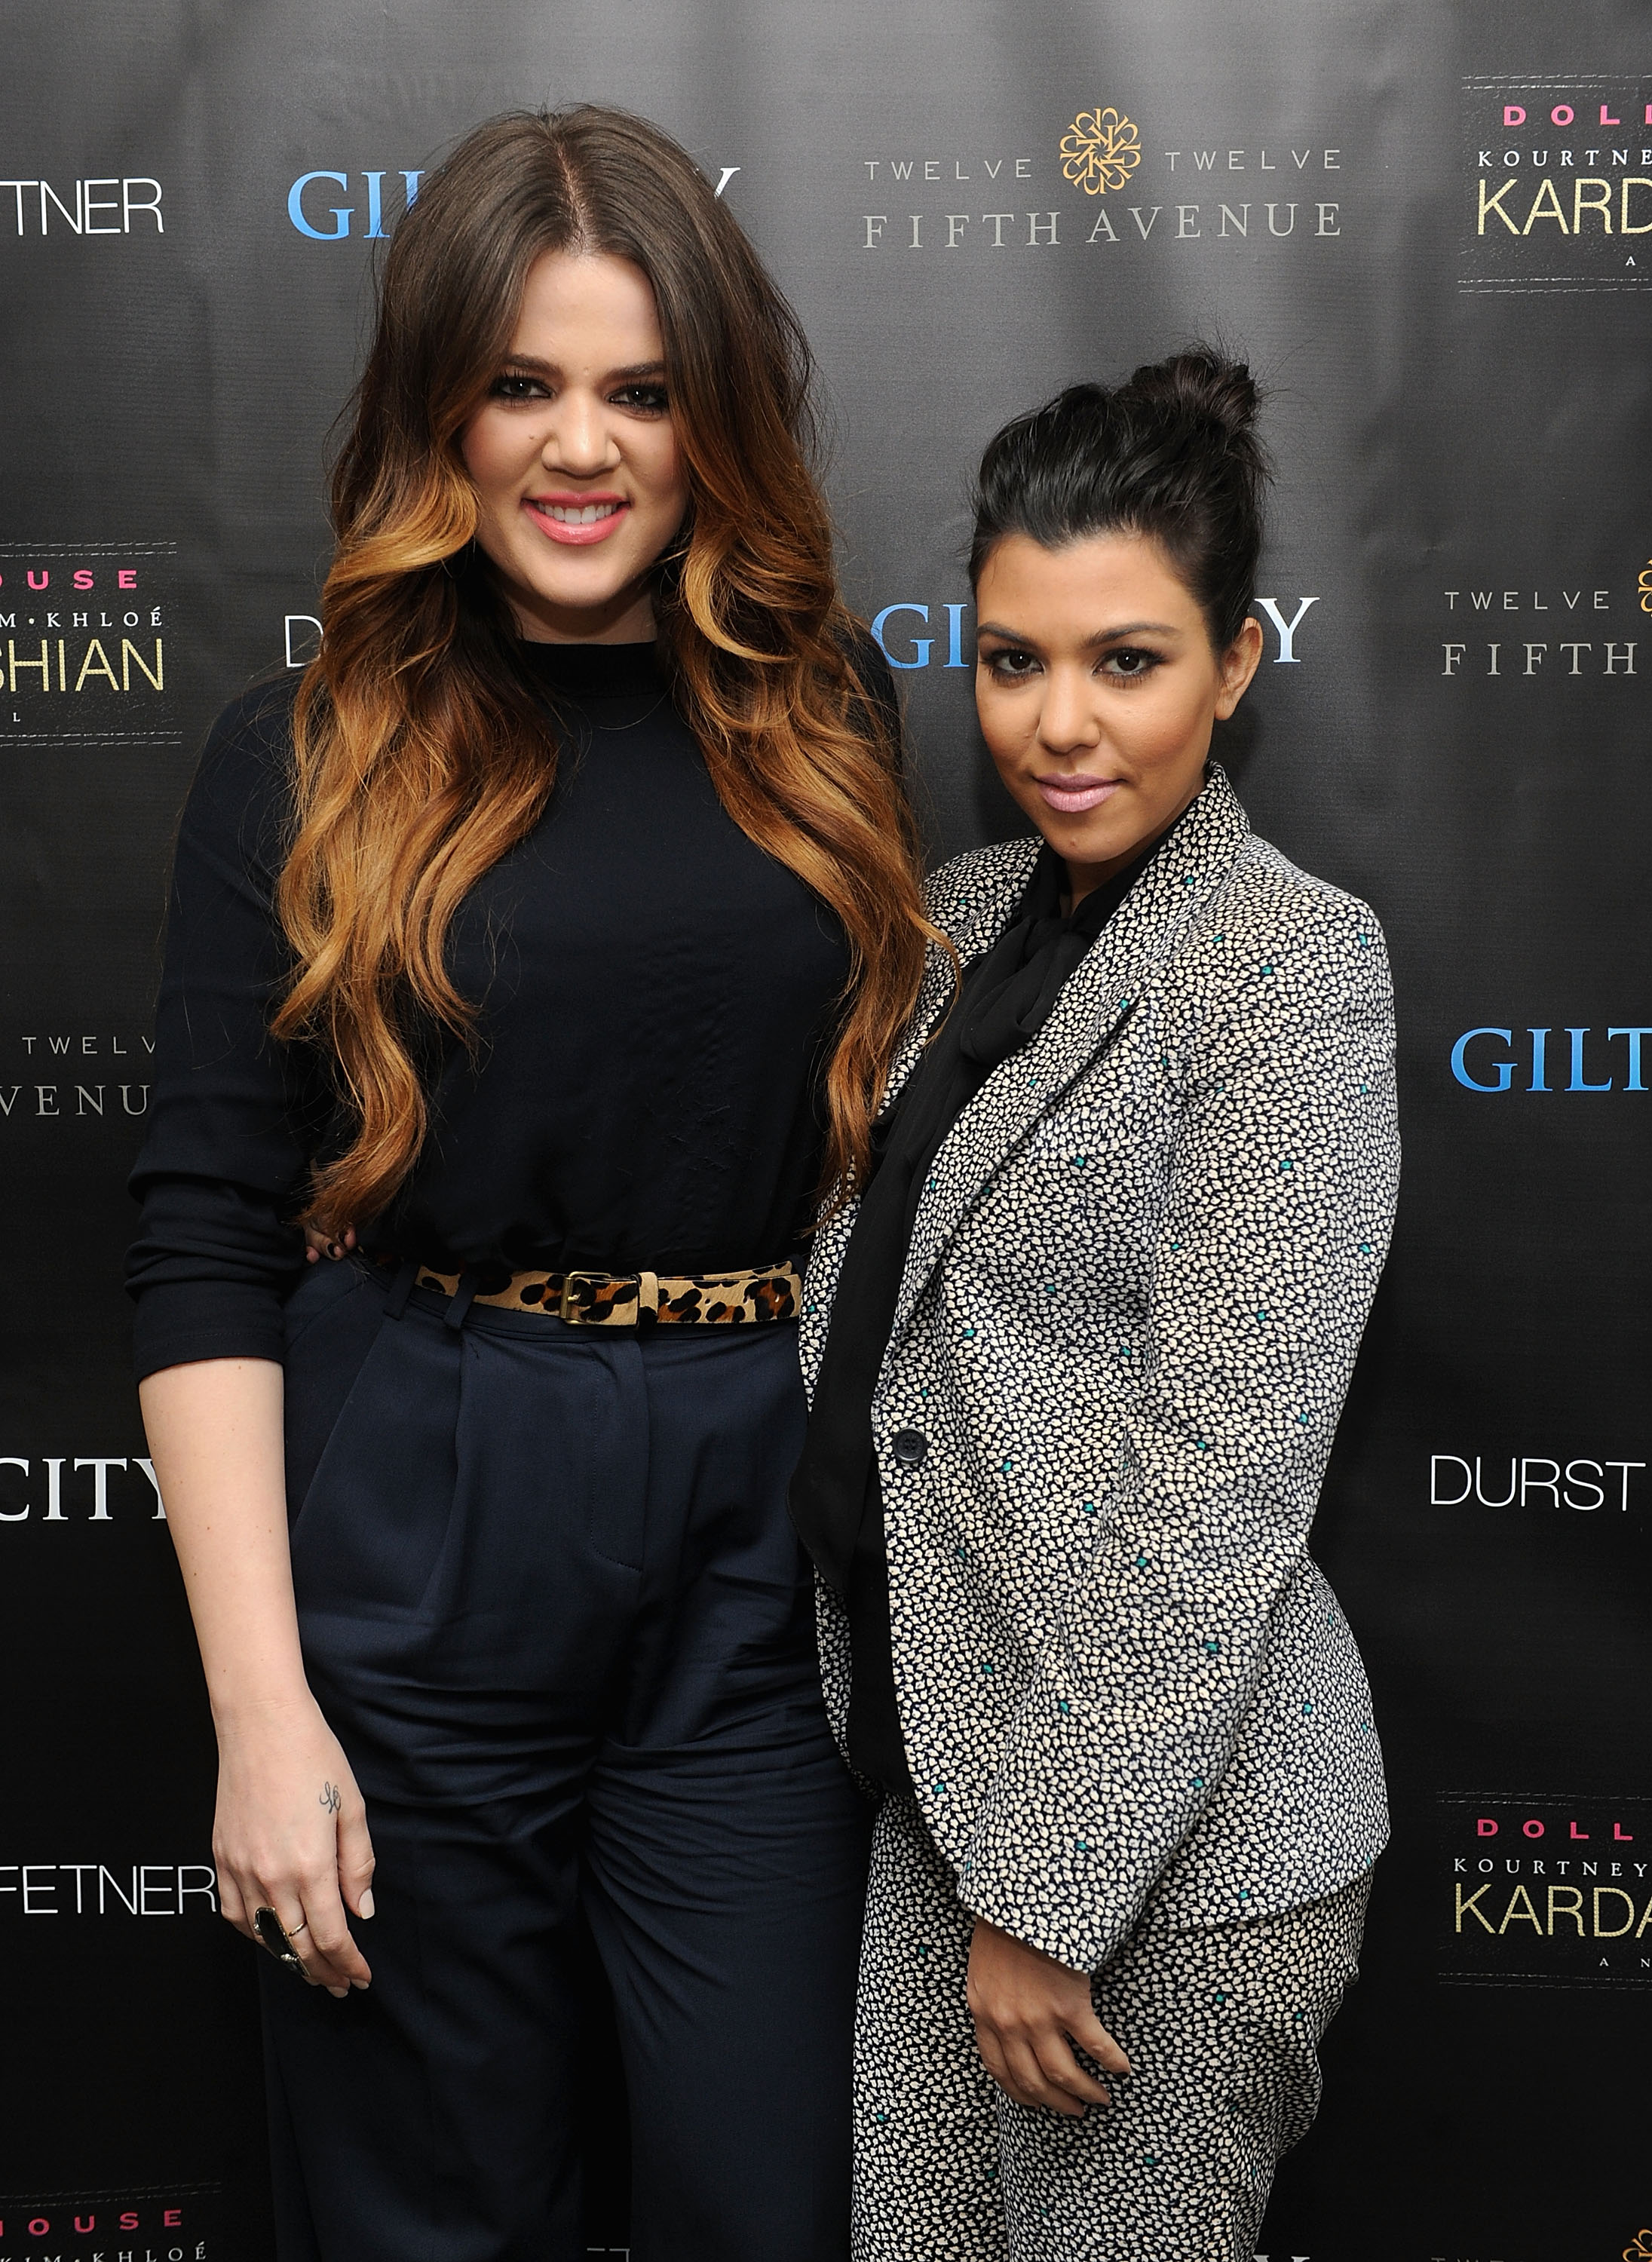 Kardashian Sisters' DASH Online Store Is Officially Live, So Get